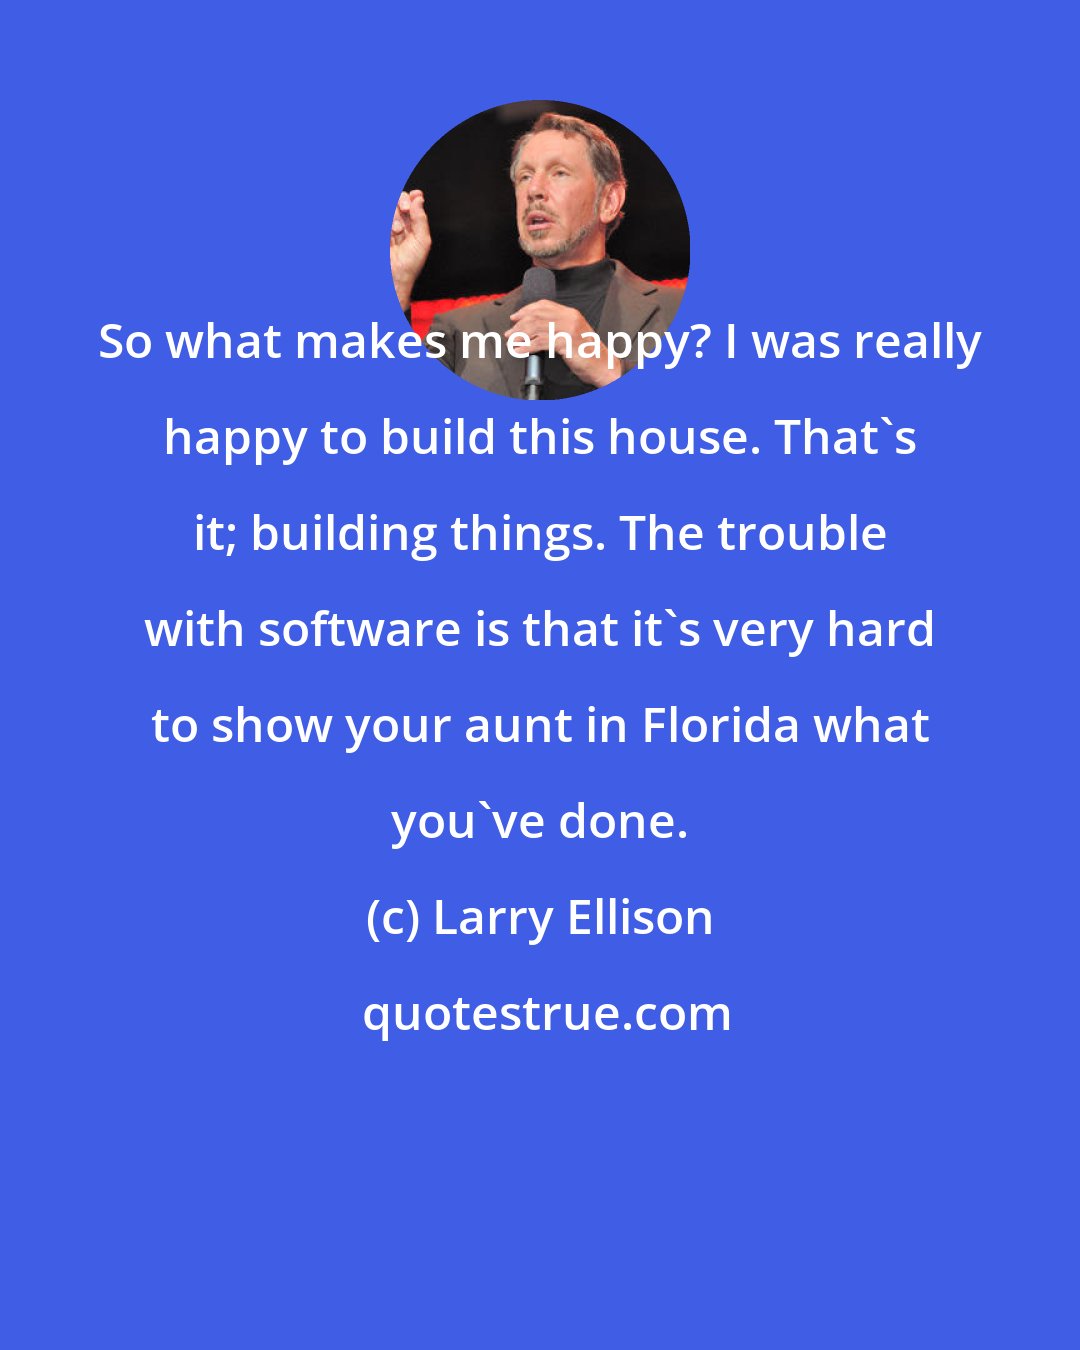 Larry Ellison: So what makes me happy? I was really happy to build this house. That's it; building things. The trouble with software is that it's very hard to show your aunt in Florida what you've done.